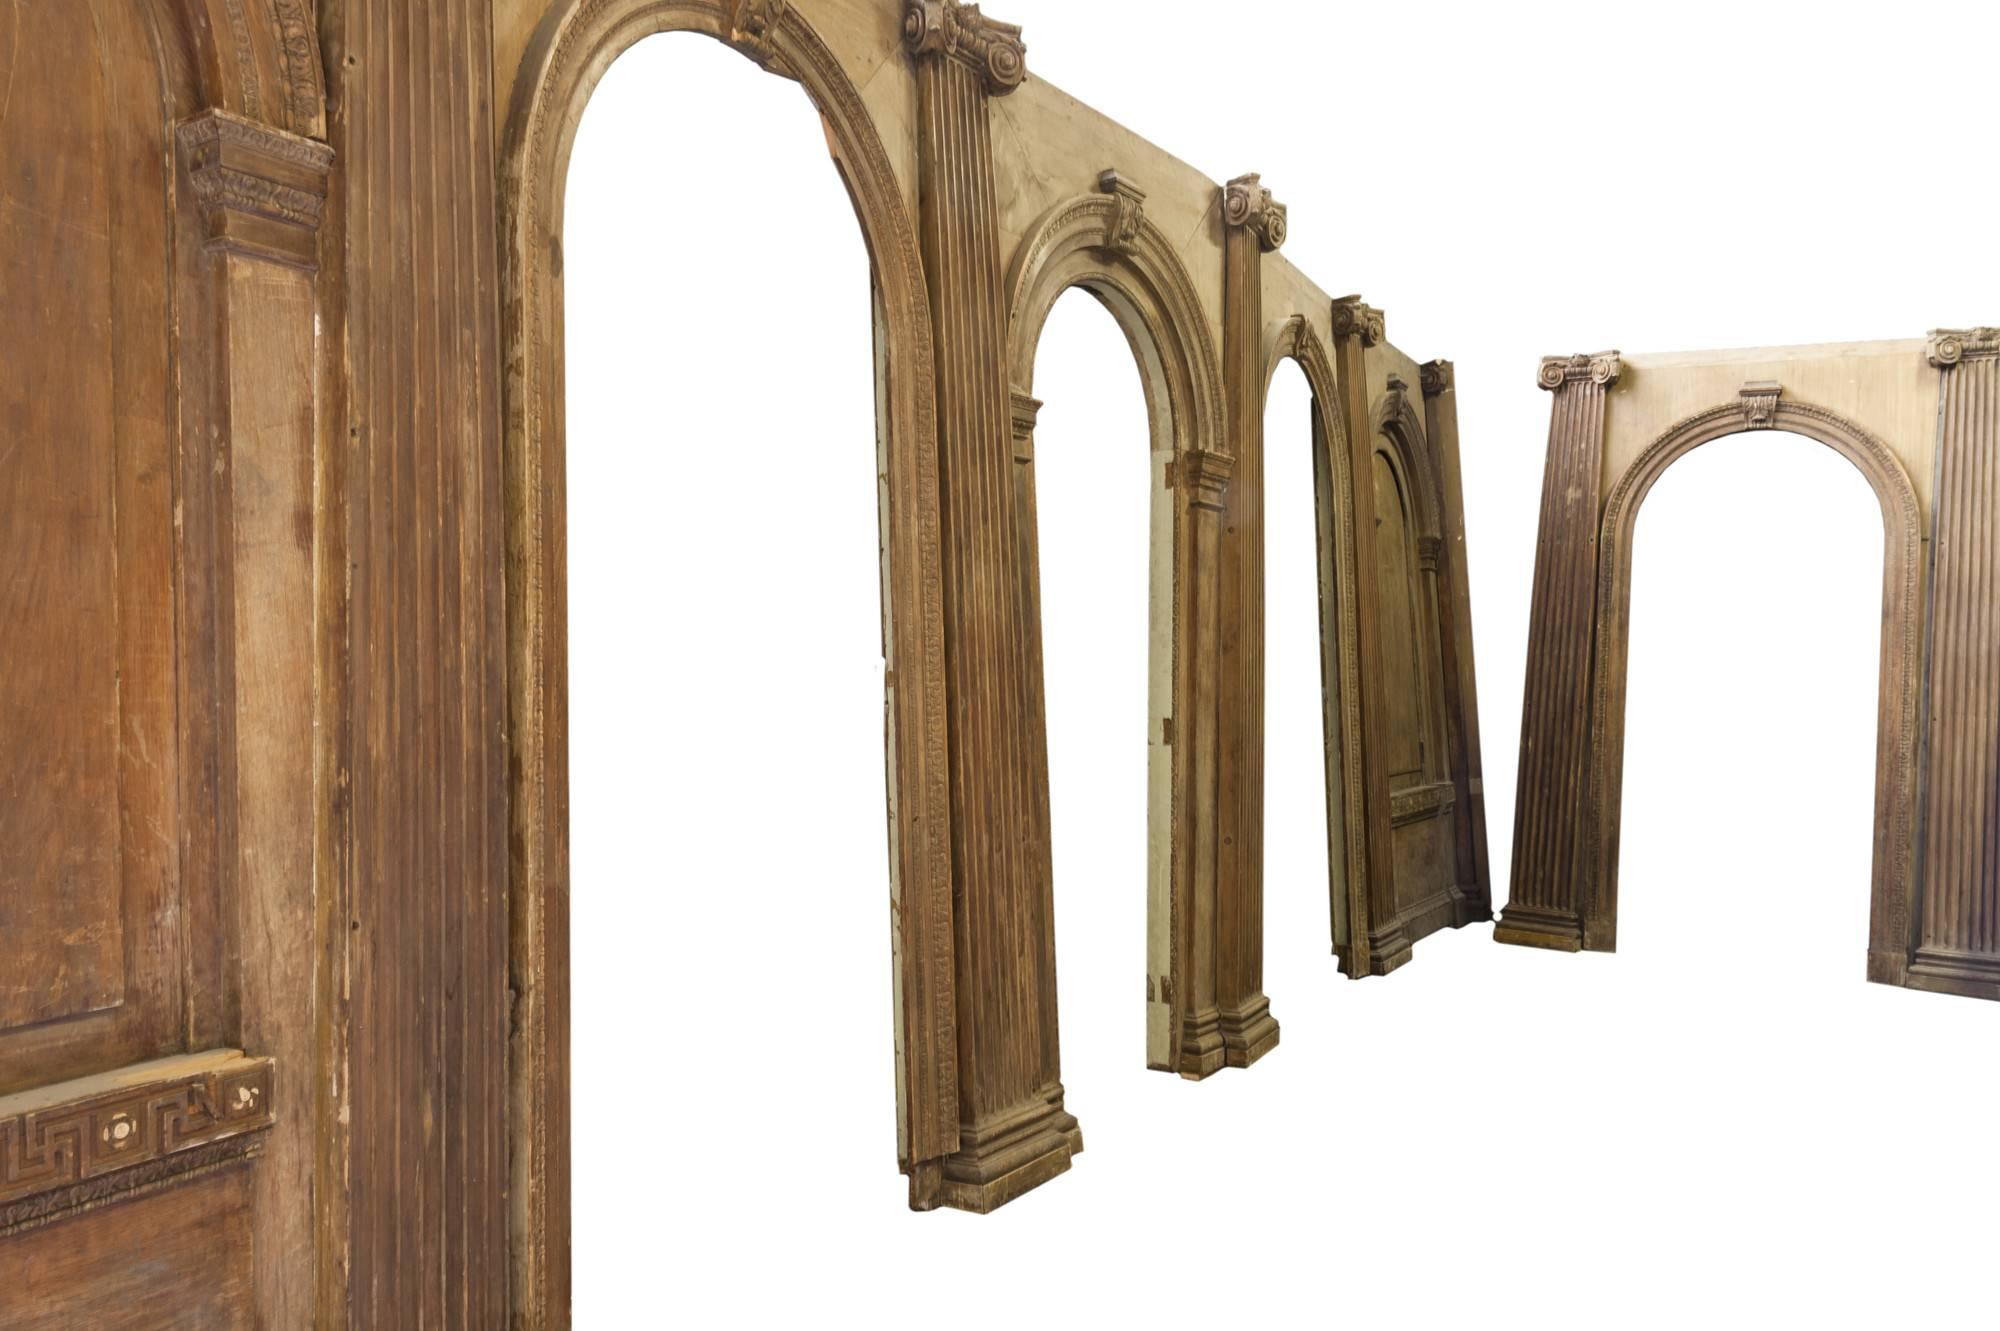 A fine 19th century carved pine ballroom by repute, came from a property on Park Lane, London. This unique run of panelling, approximately 84 running feet at 11 ft 9 ins tall, consists of 12 bays (either for mirror, infill, or window)flanked by